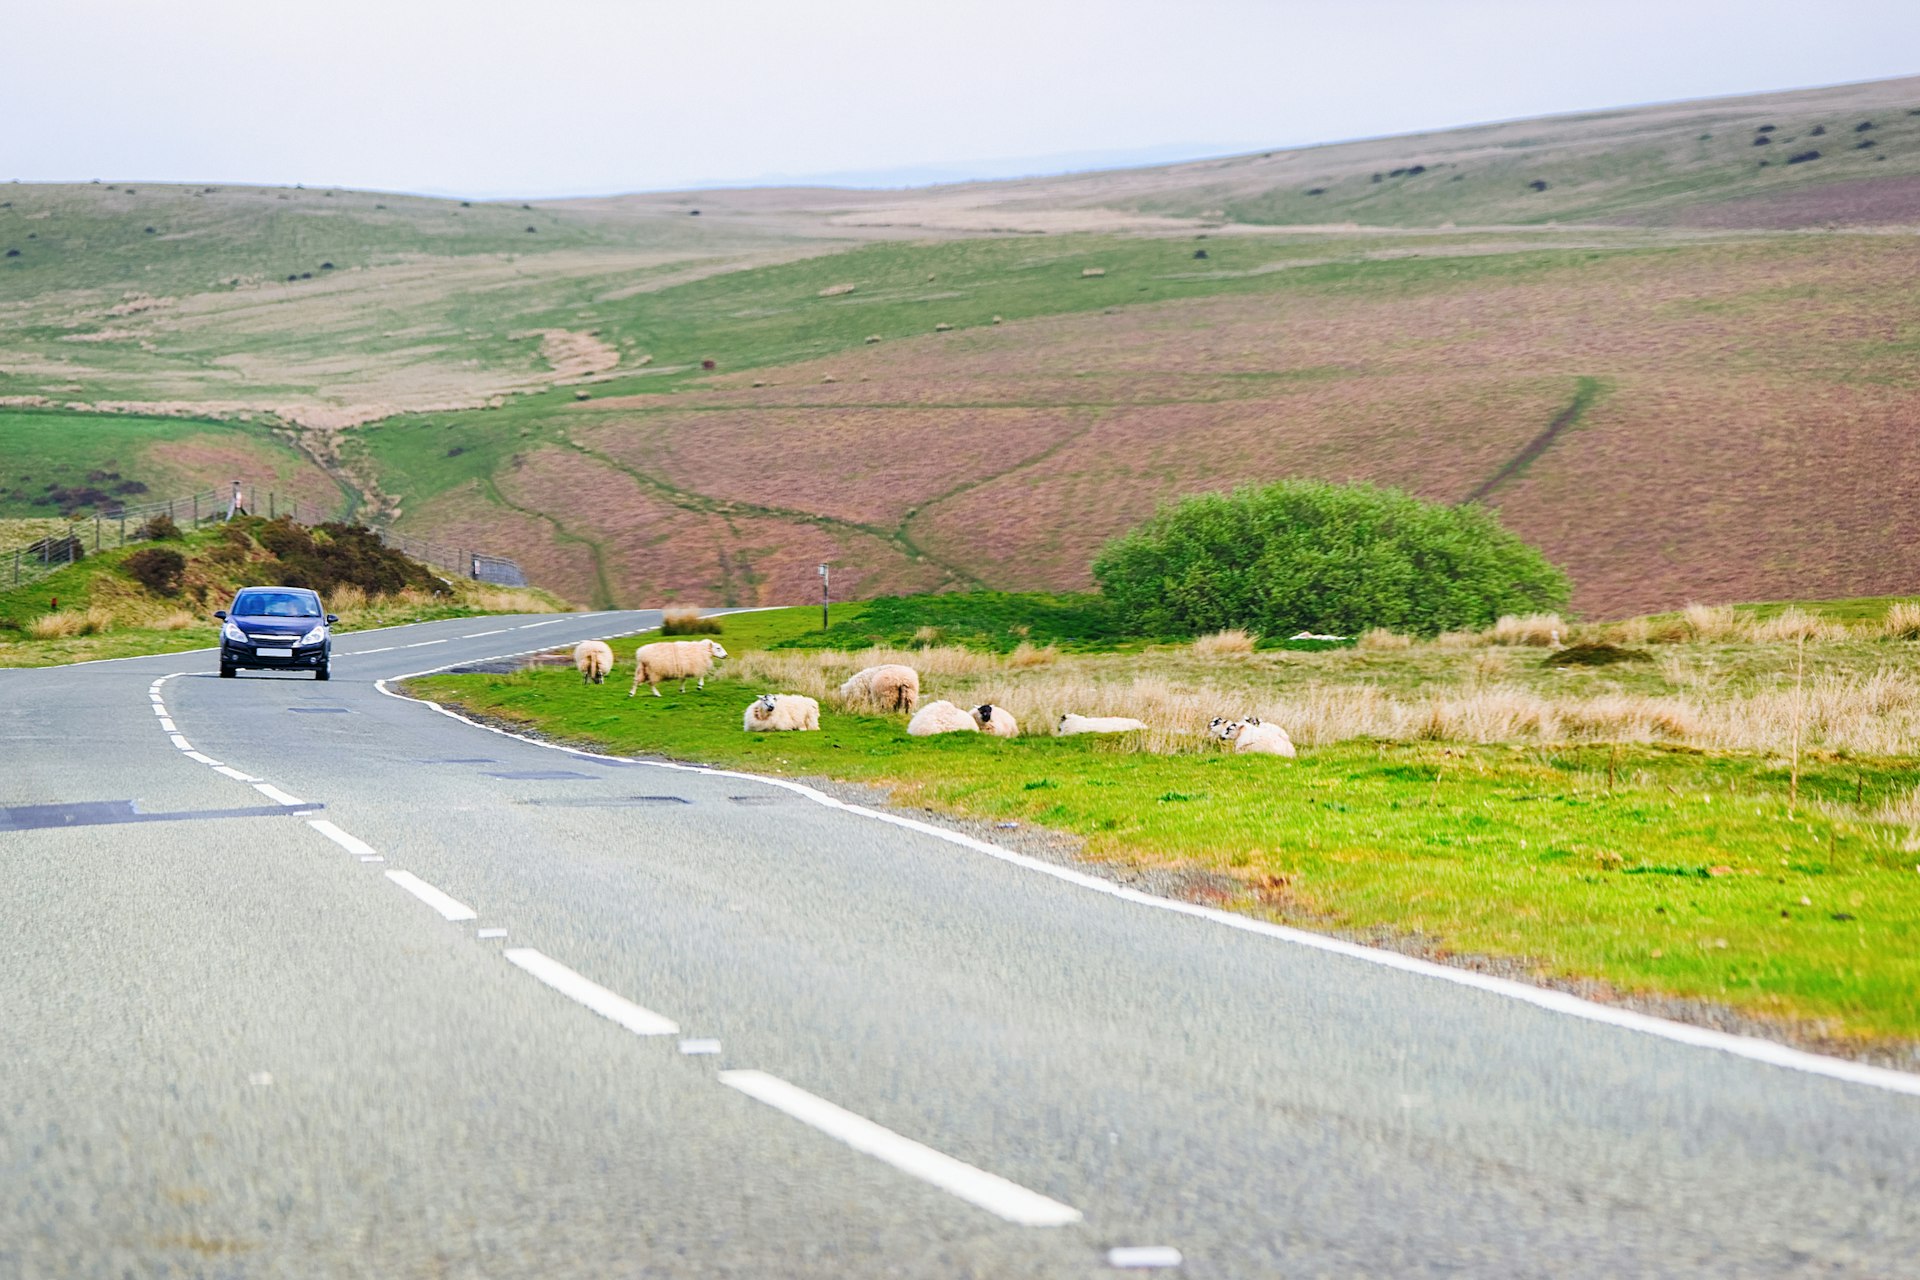 A car drives along a tarmac road in a rural hilly area. Several sheep stand at the edge of the road